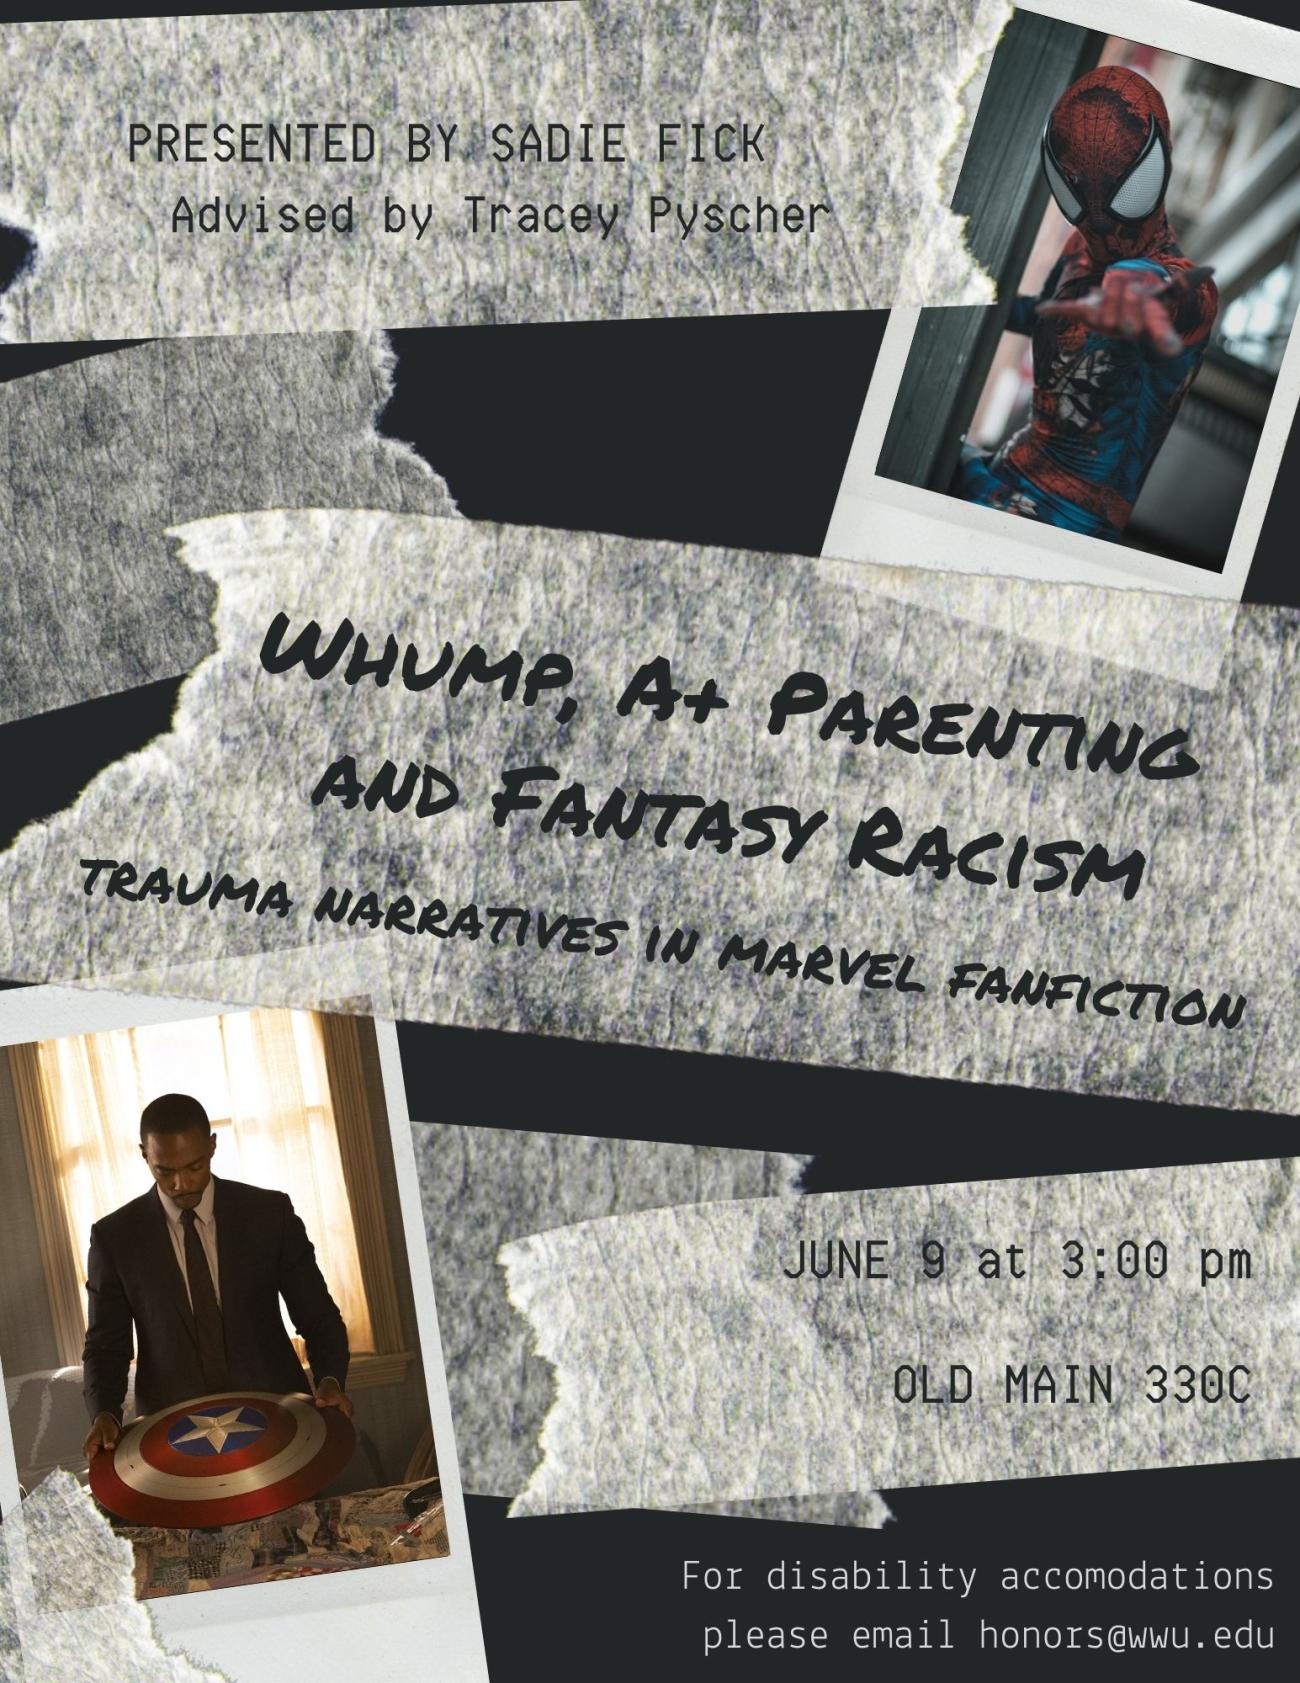 A poster with a polaroid photo of Spiderman in a torn and smoke-smudged uniform and a polaroid photo of Sam Wilson, the Falcon, wearing a formal suit and looking gravely at the Captain America shield. Between the photos, strips of masking tape on a dark background highlight the text "Whump, A+ Parenting and Fantasy Racism: Trauma Narratives in Marvel Fanfiction. Presented by Sadie Fick, advised by Tracey Pysher. June 9 at 3:00 pm, Old Main 330C. For disability accommodations please email honors@wwu.edu."